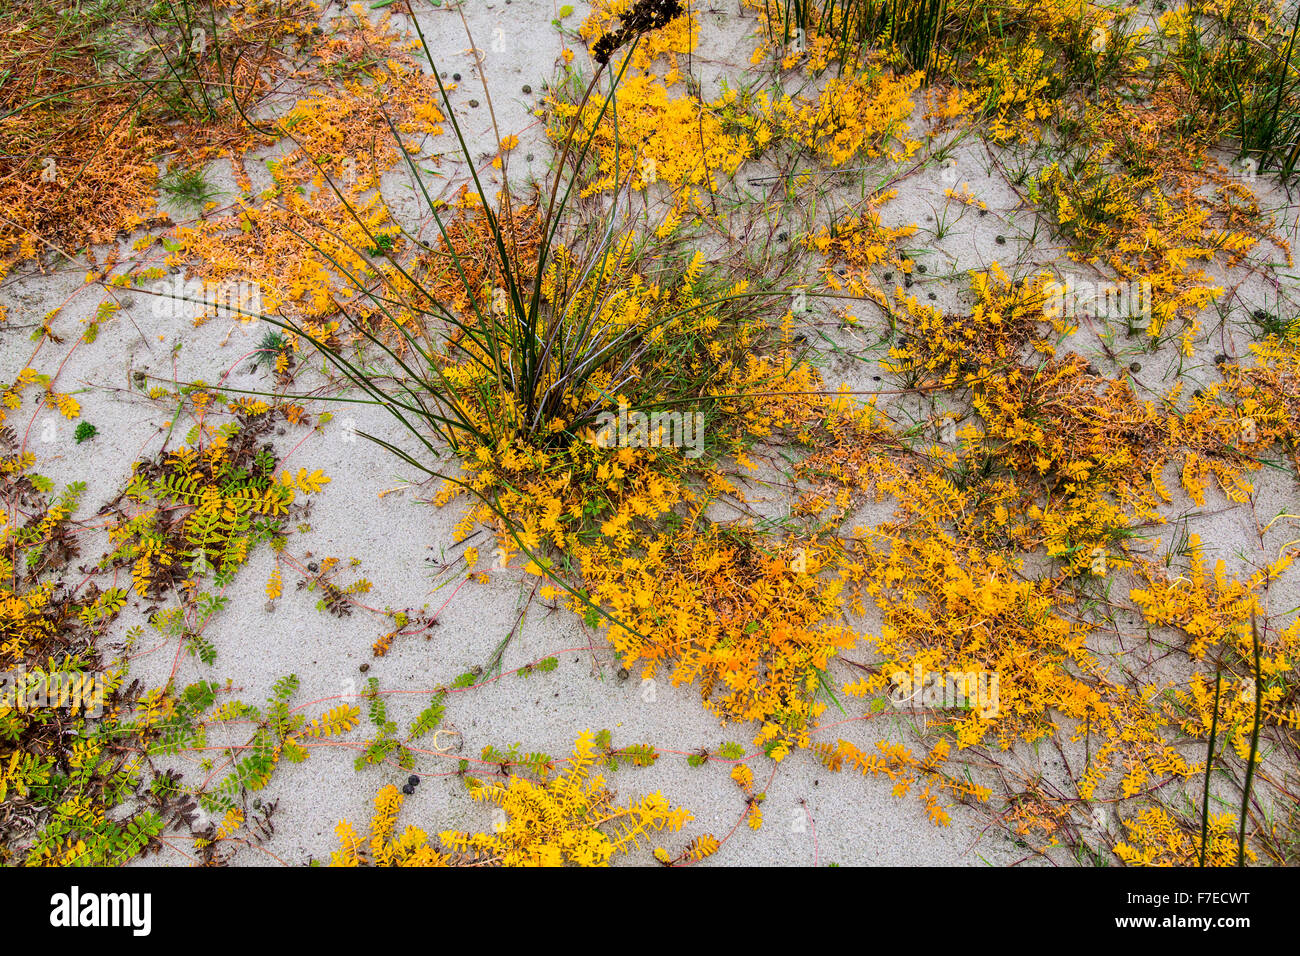 Beach grass and lichen growths in autumnal colors, North Sea island of Spiekeroog, Germany Stock Photo